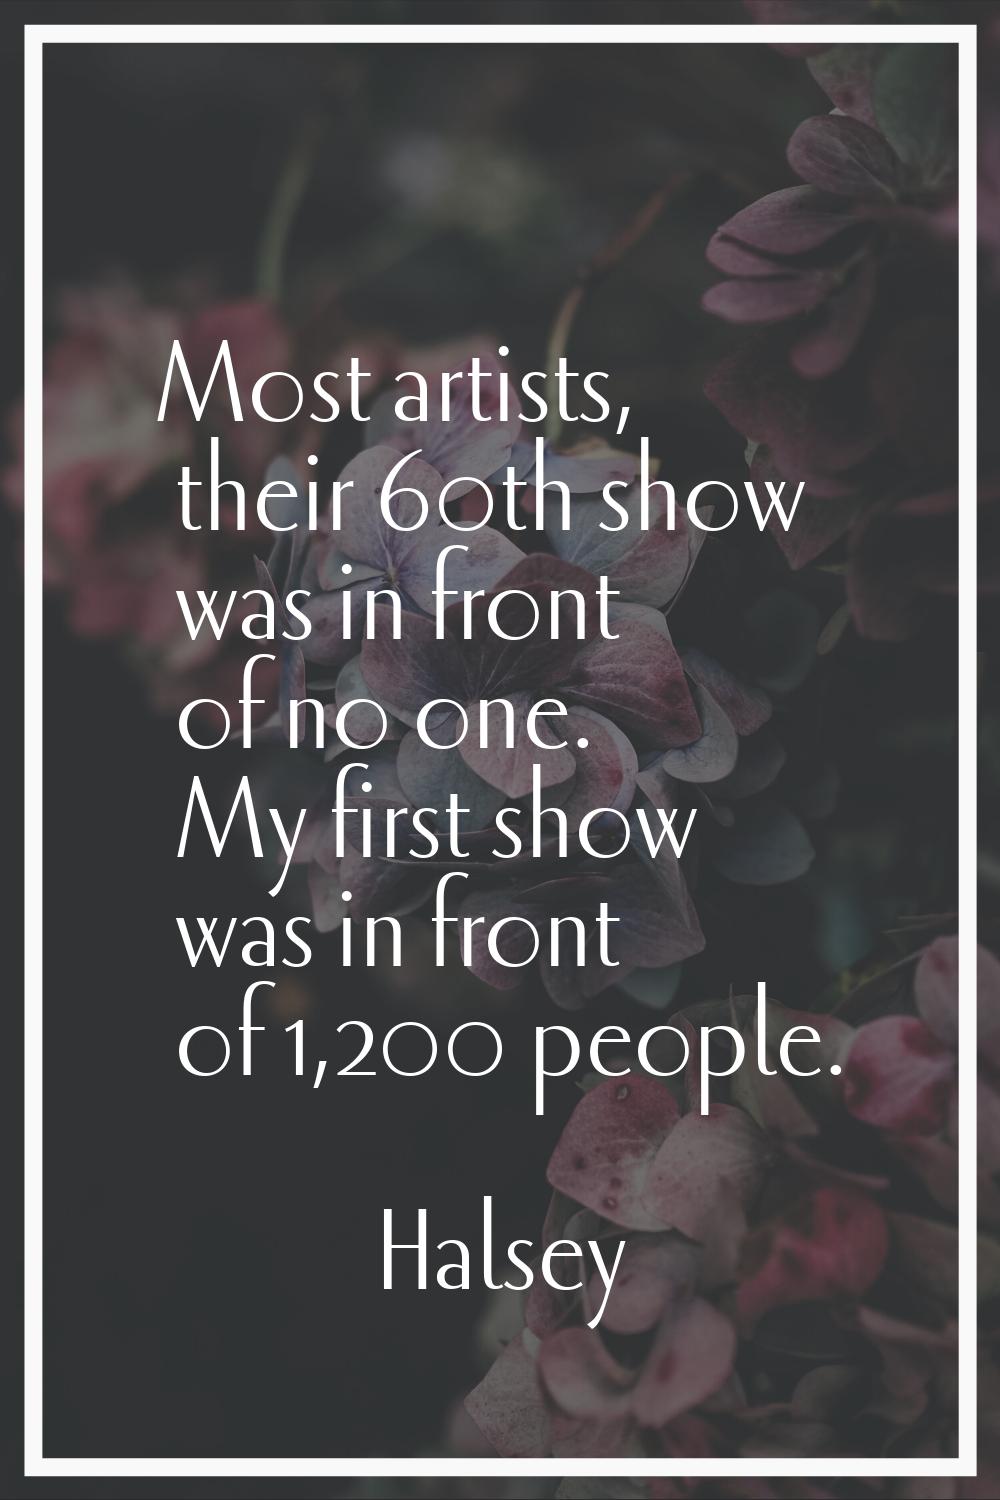 Most artists, their 60th show was in front of no one. My first show was in front of 1,200 people.